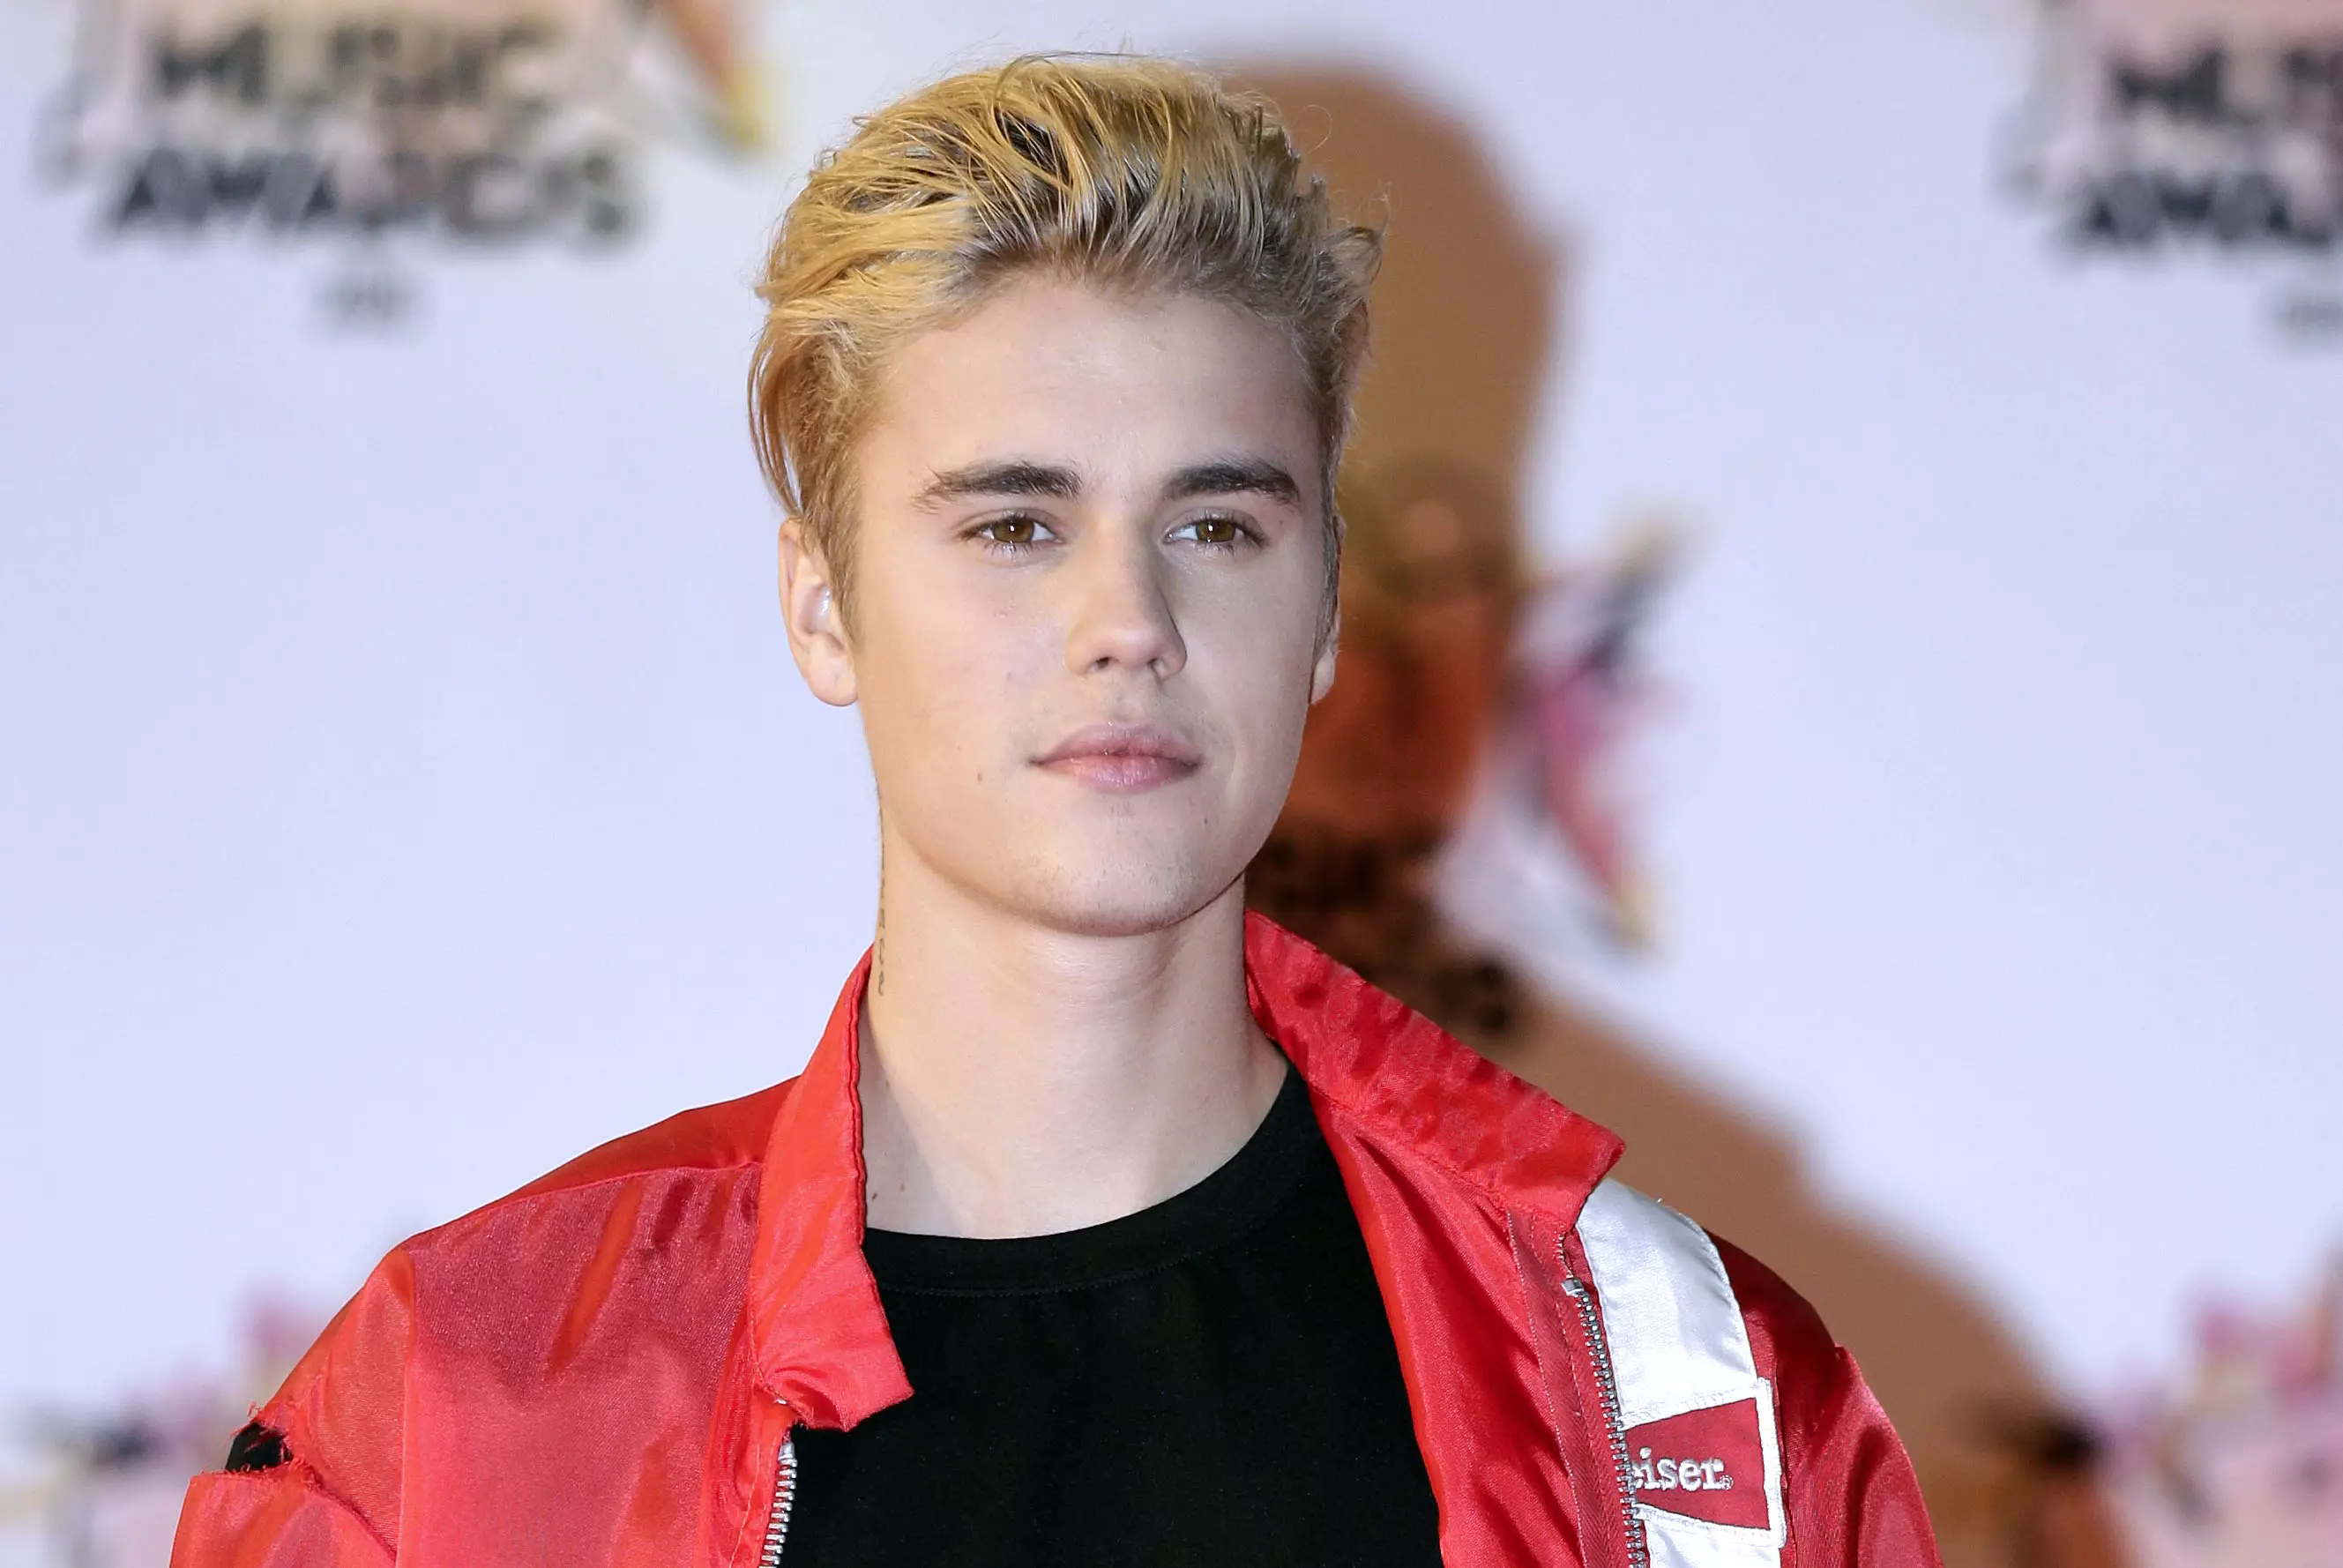 Guy Punched By Justin Bieber Could Potentially Sue The Singer